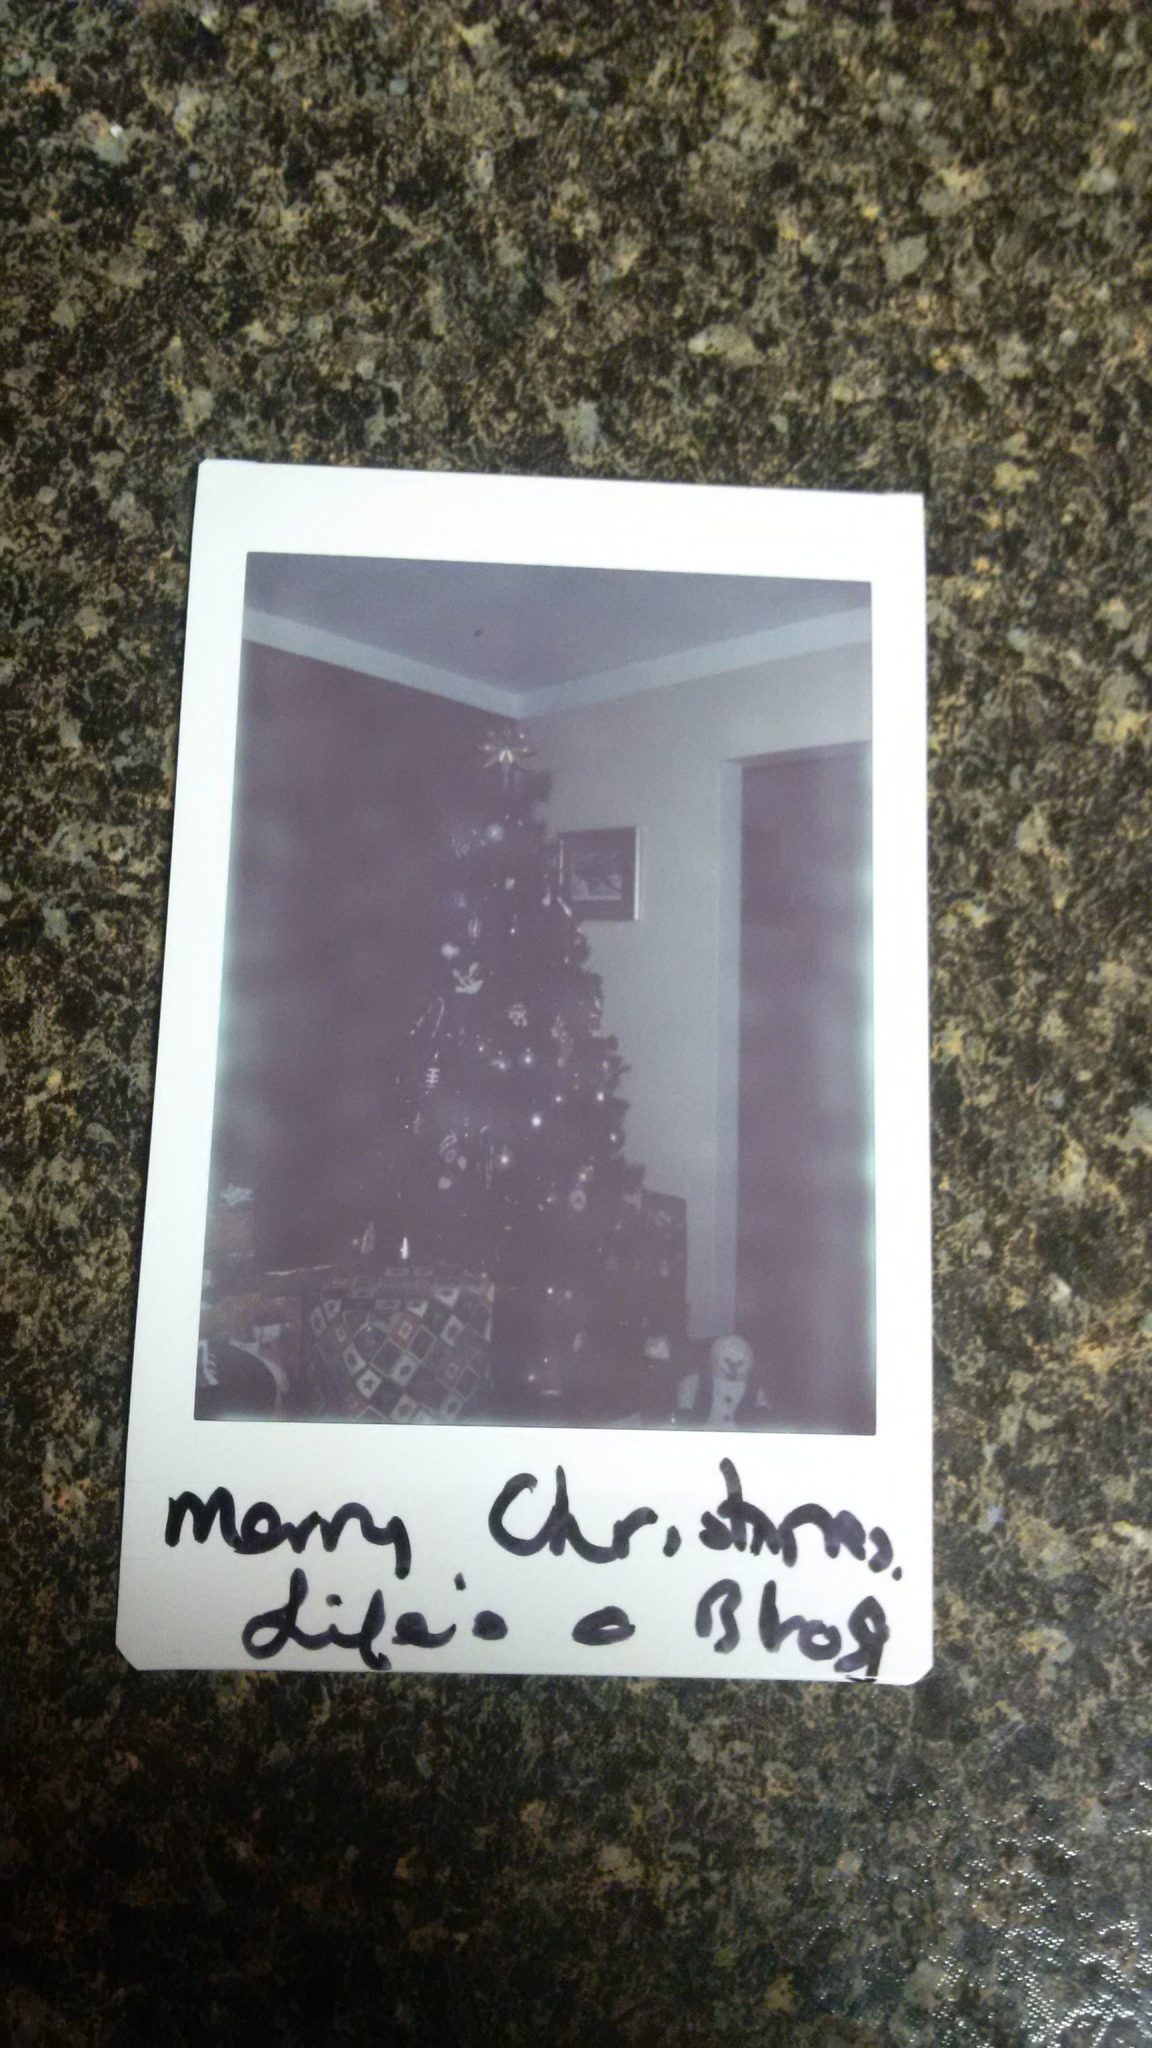 Tis the Season for a Fuji Instax Giveaway